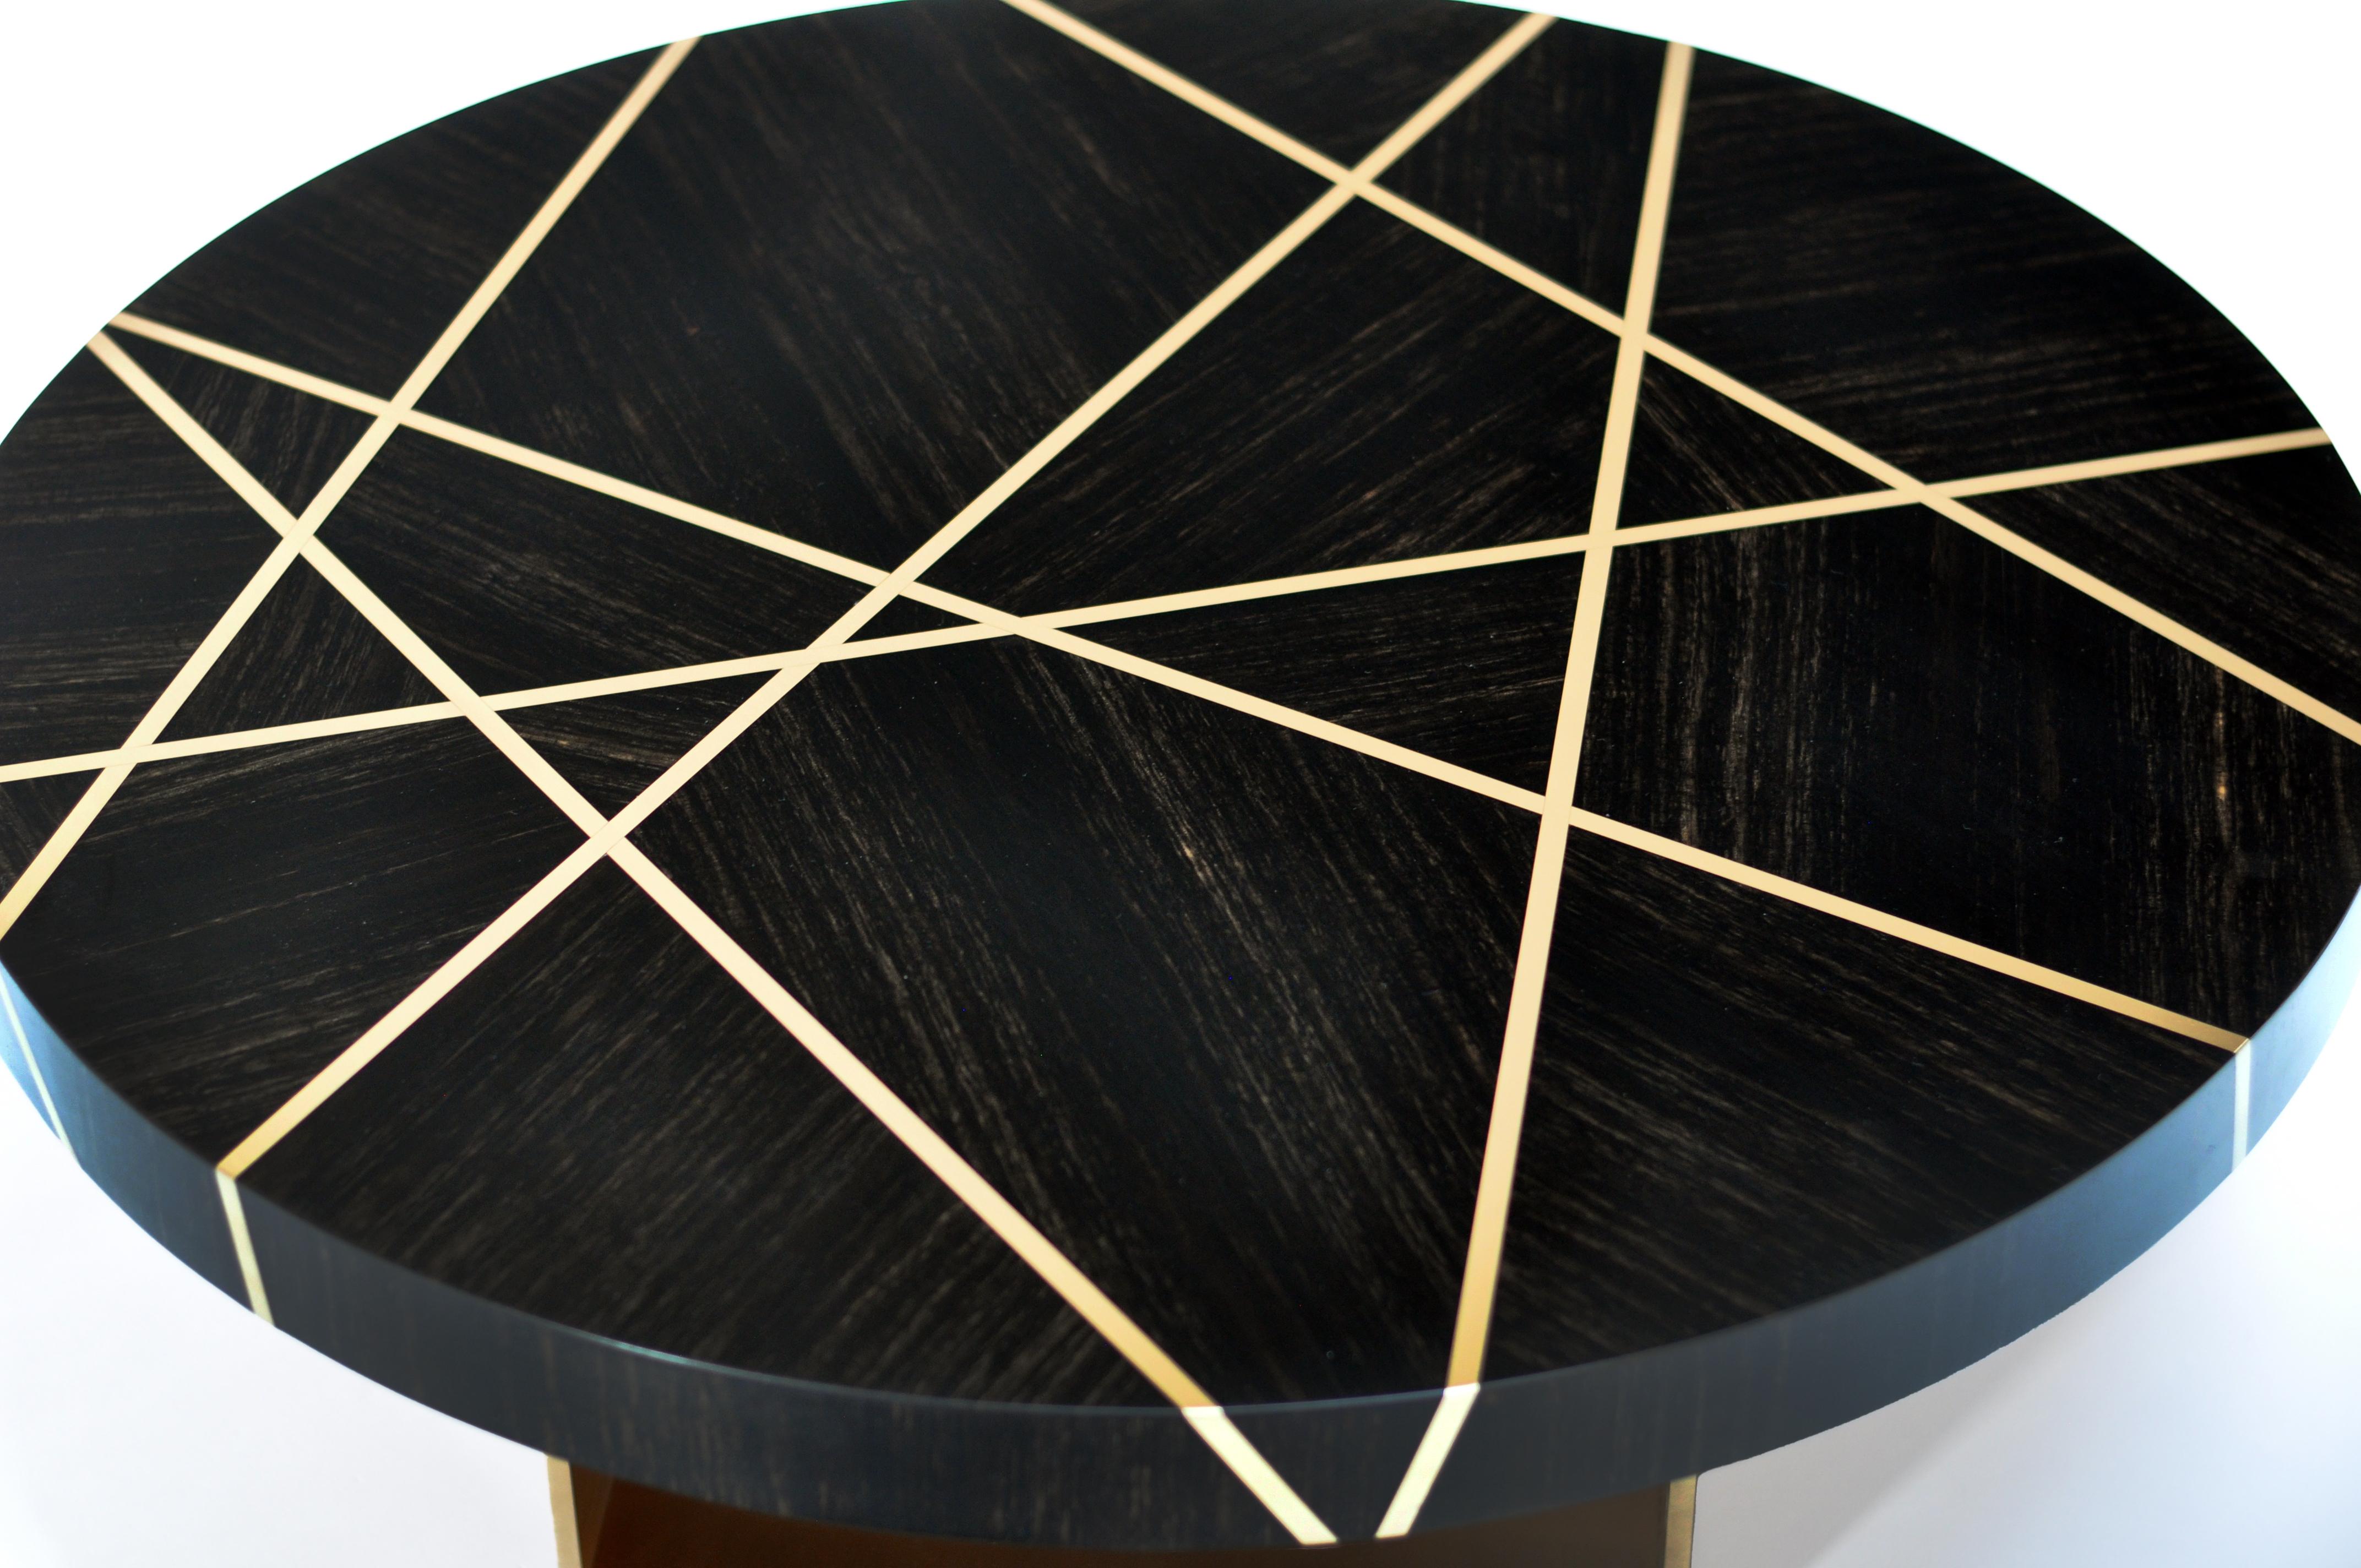 Ray cocktail table in Gabon Ebony with bronze inlay and bronze base is created to be a notable piece. Gabon Ebony is a perfect companion to Bronze. The black wood may have occasional caramel streaks which add to the beauty of the wood and enhance